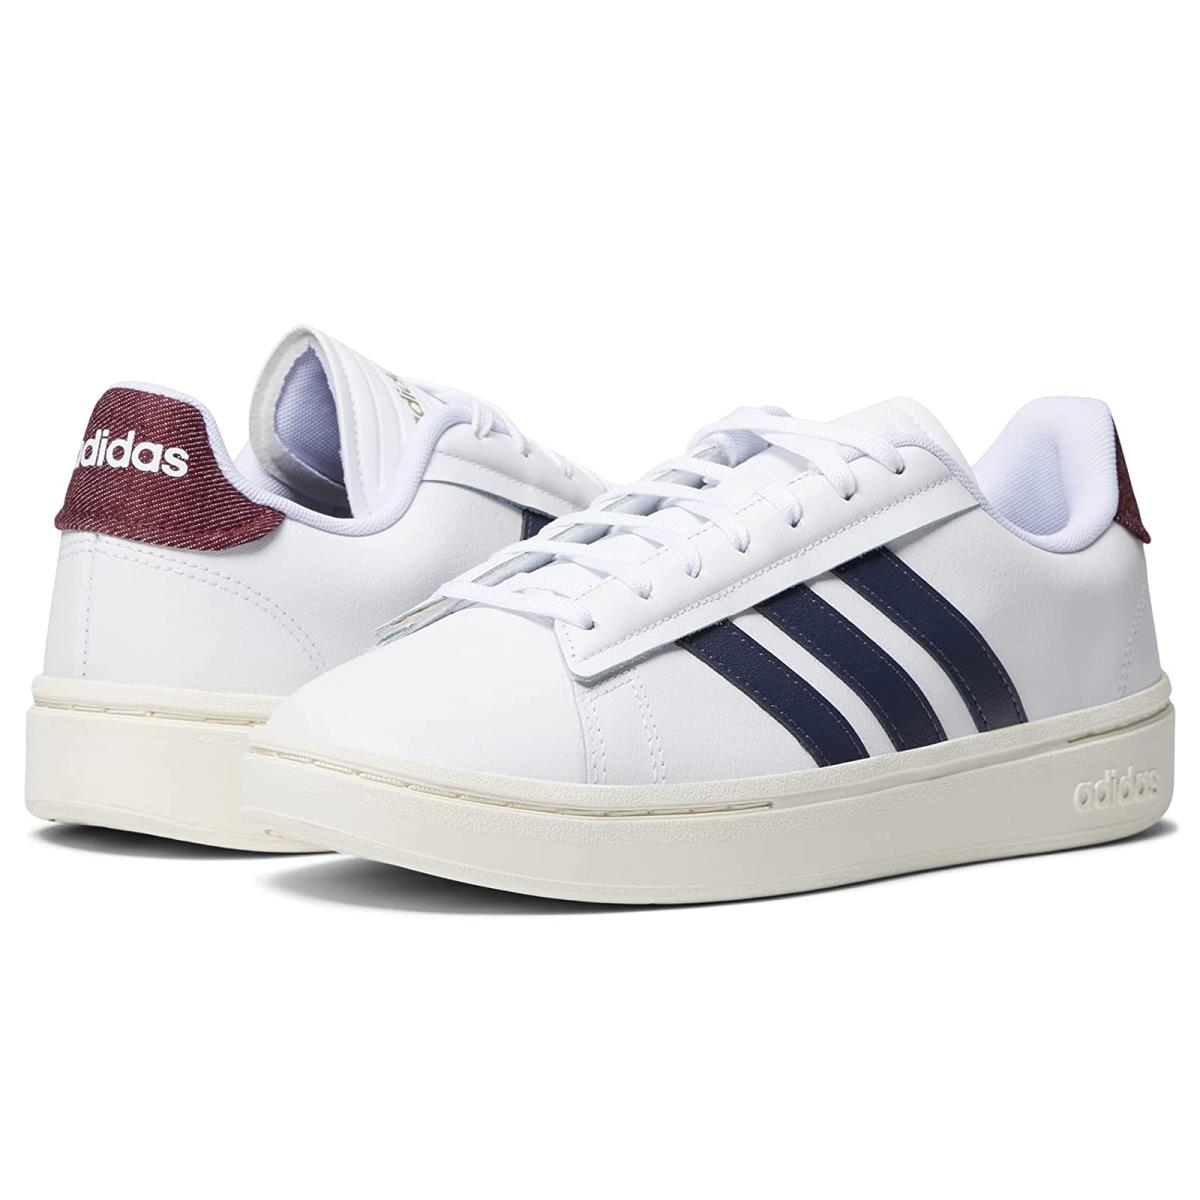 Man`s Sneakers Athletic Shoes Adidas Originals Grand Court Alpha White/Shadow Navy/Shadow Red